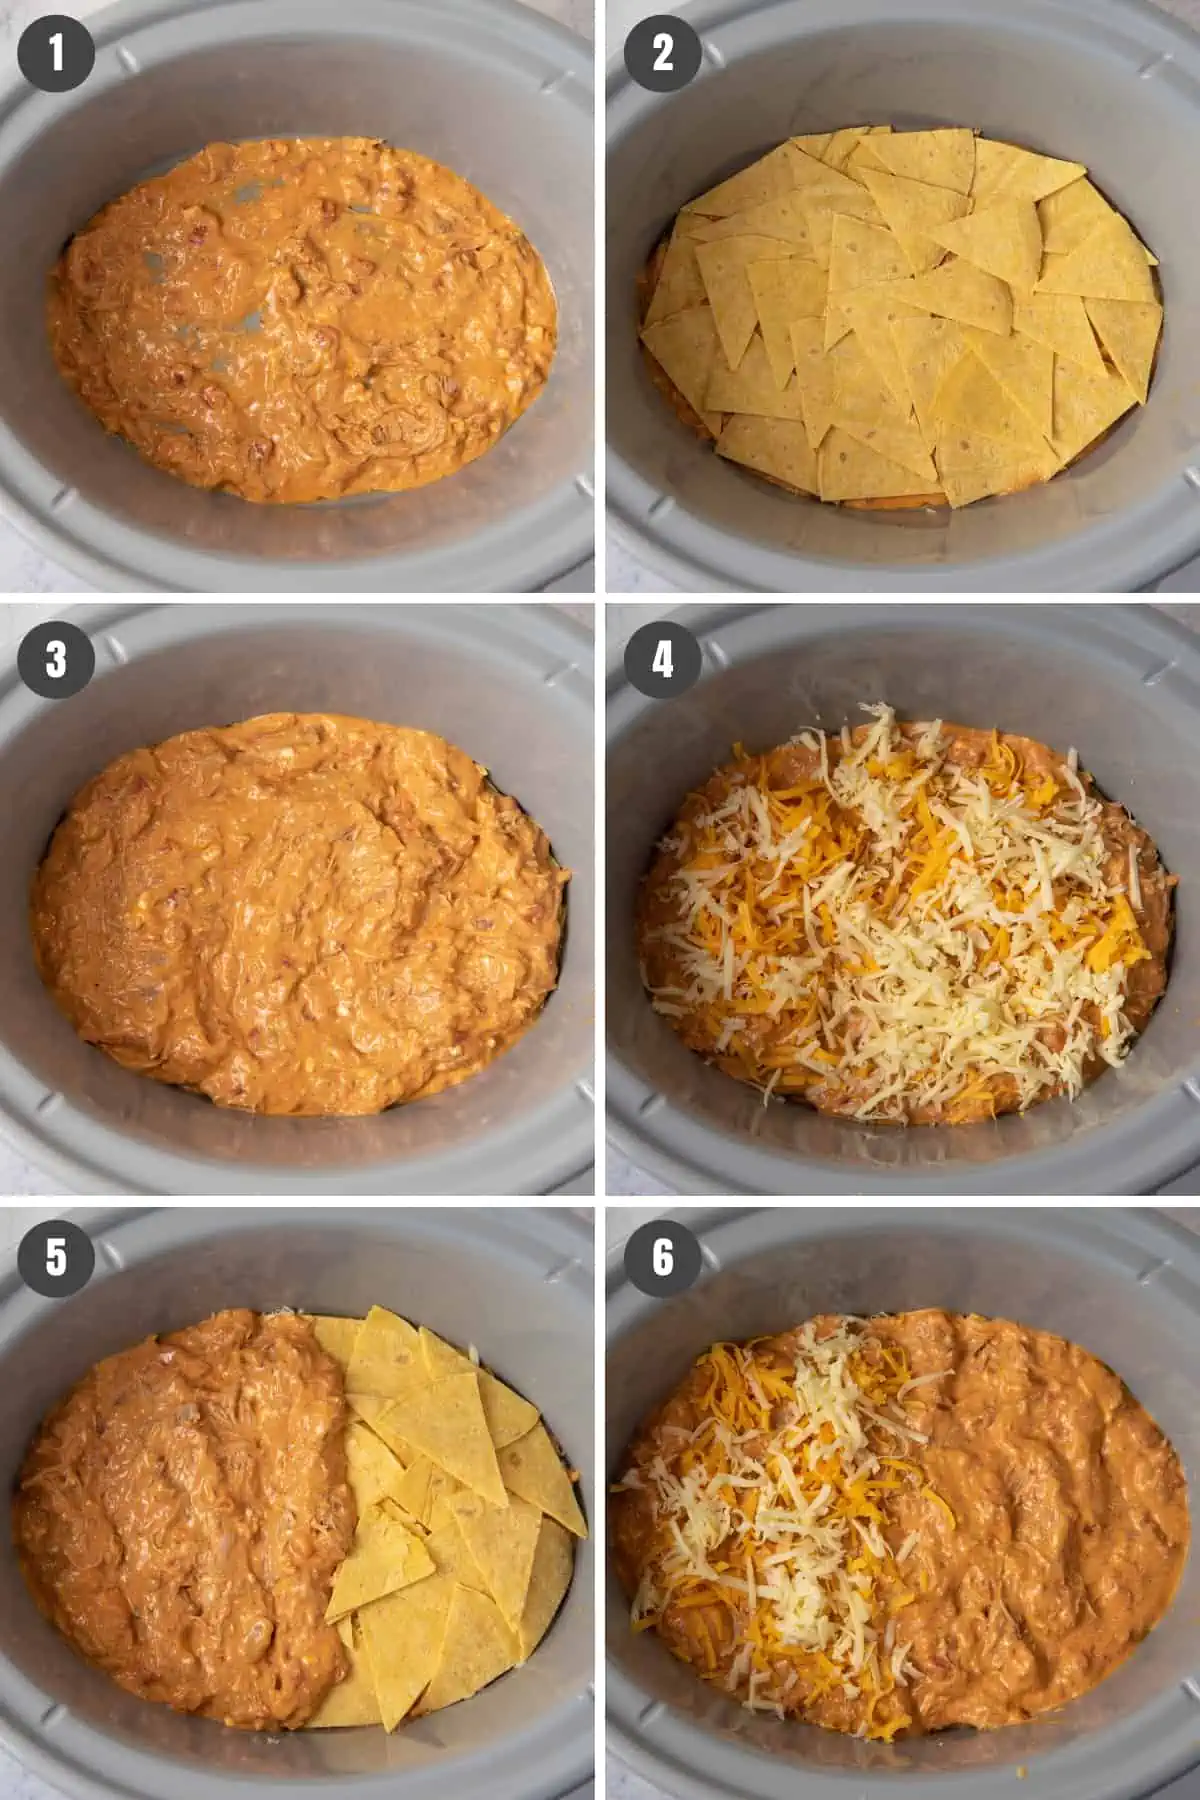 steps for how to make CrockPot chicken enchilada casserole by layering ingredients in gray slow cooker